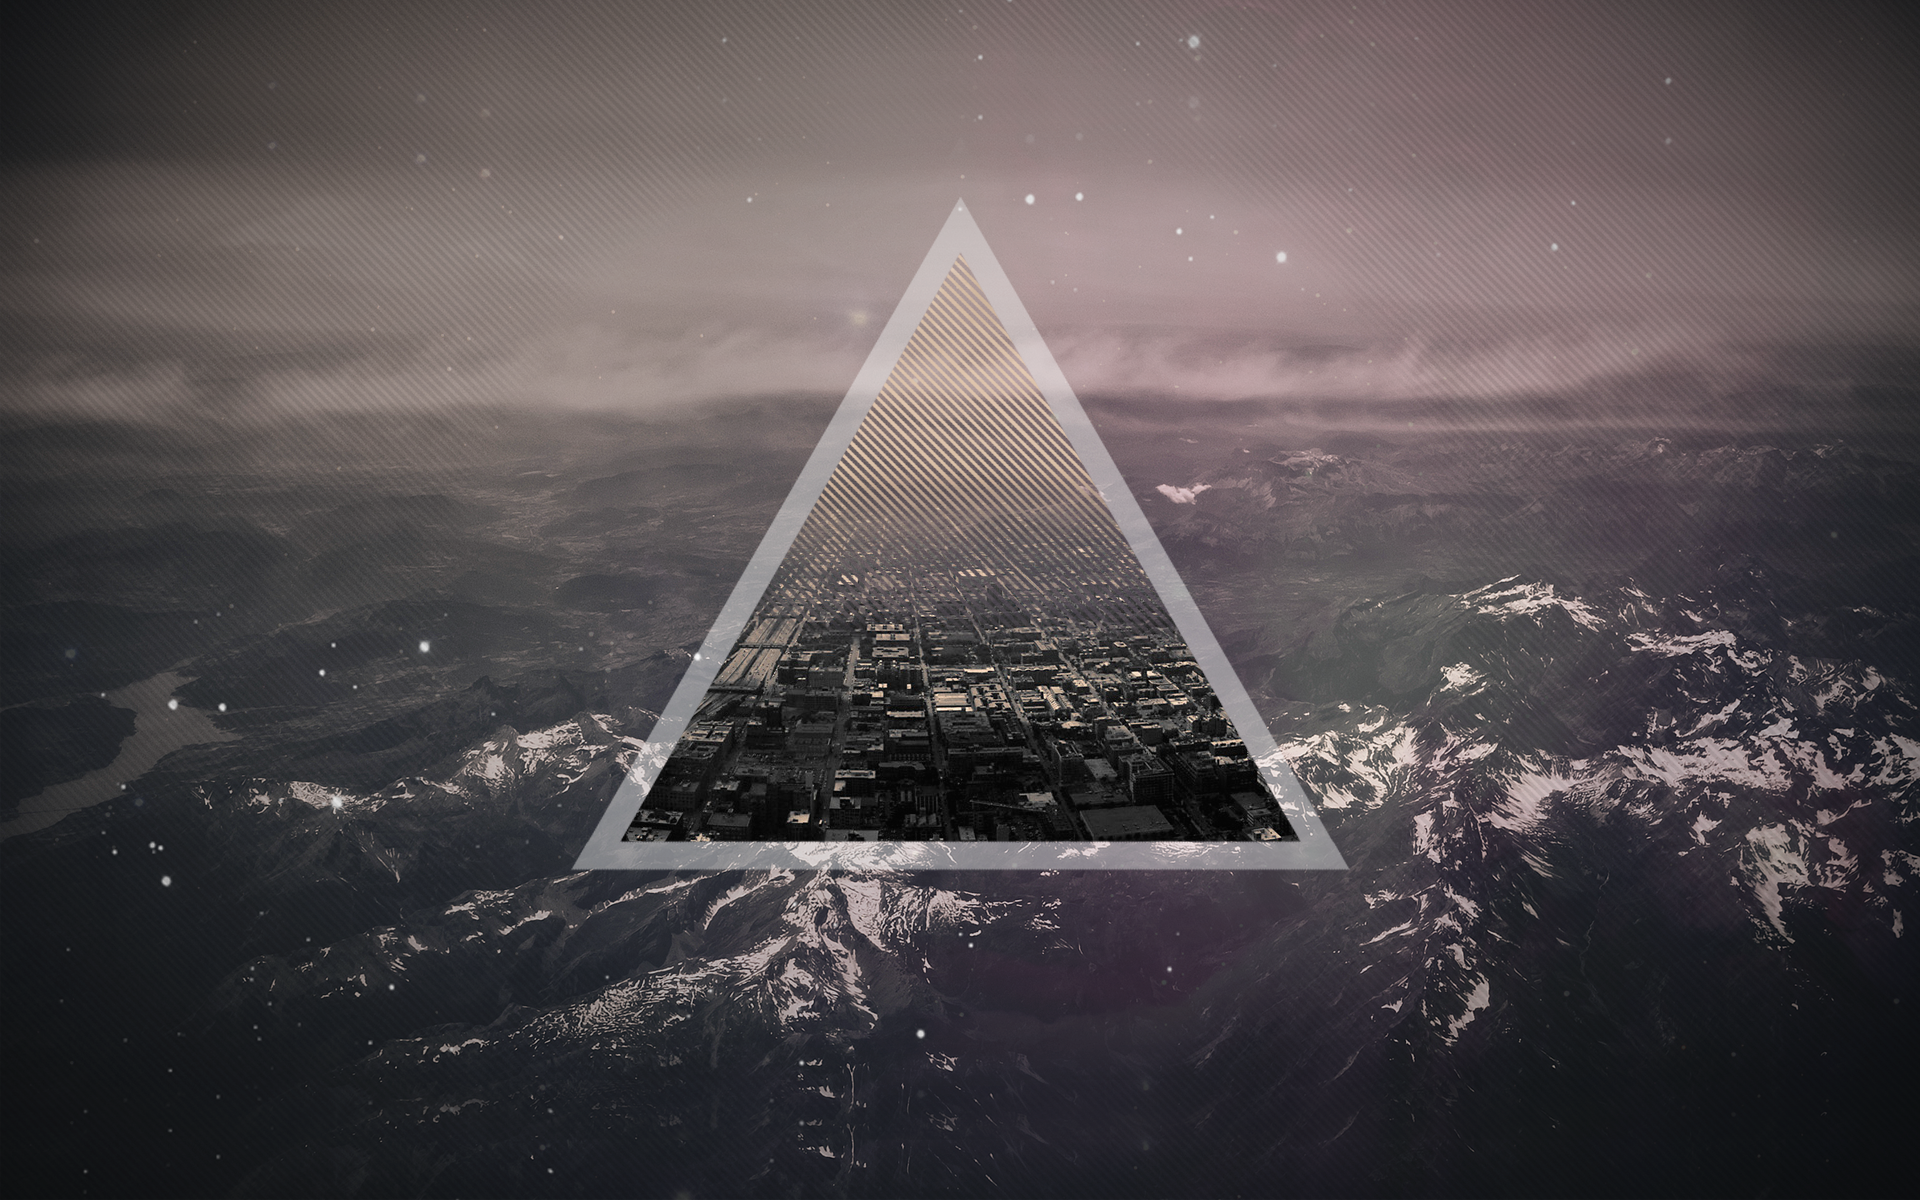 General 1920x1200 triangle geometry photo manipulation mountains abstract nature landscape cityscape digital art